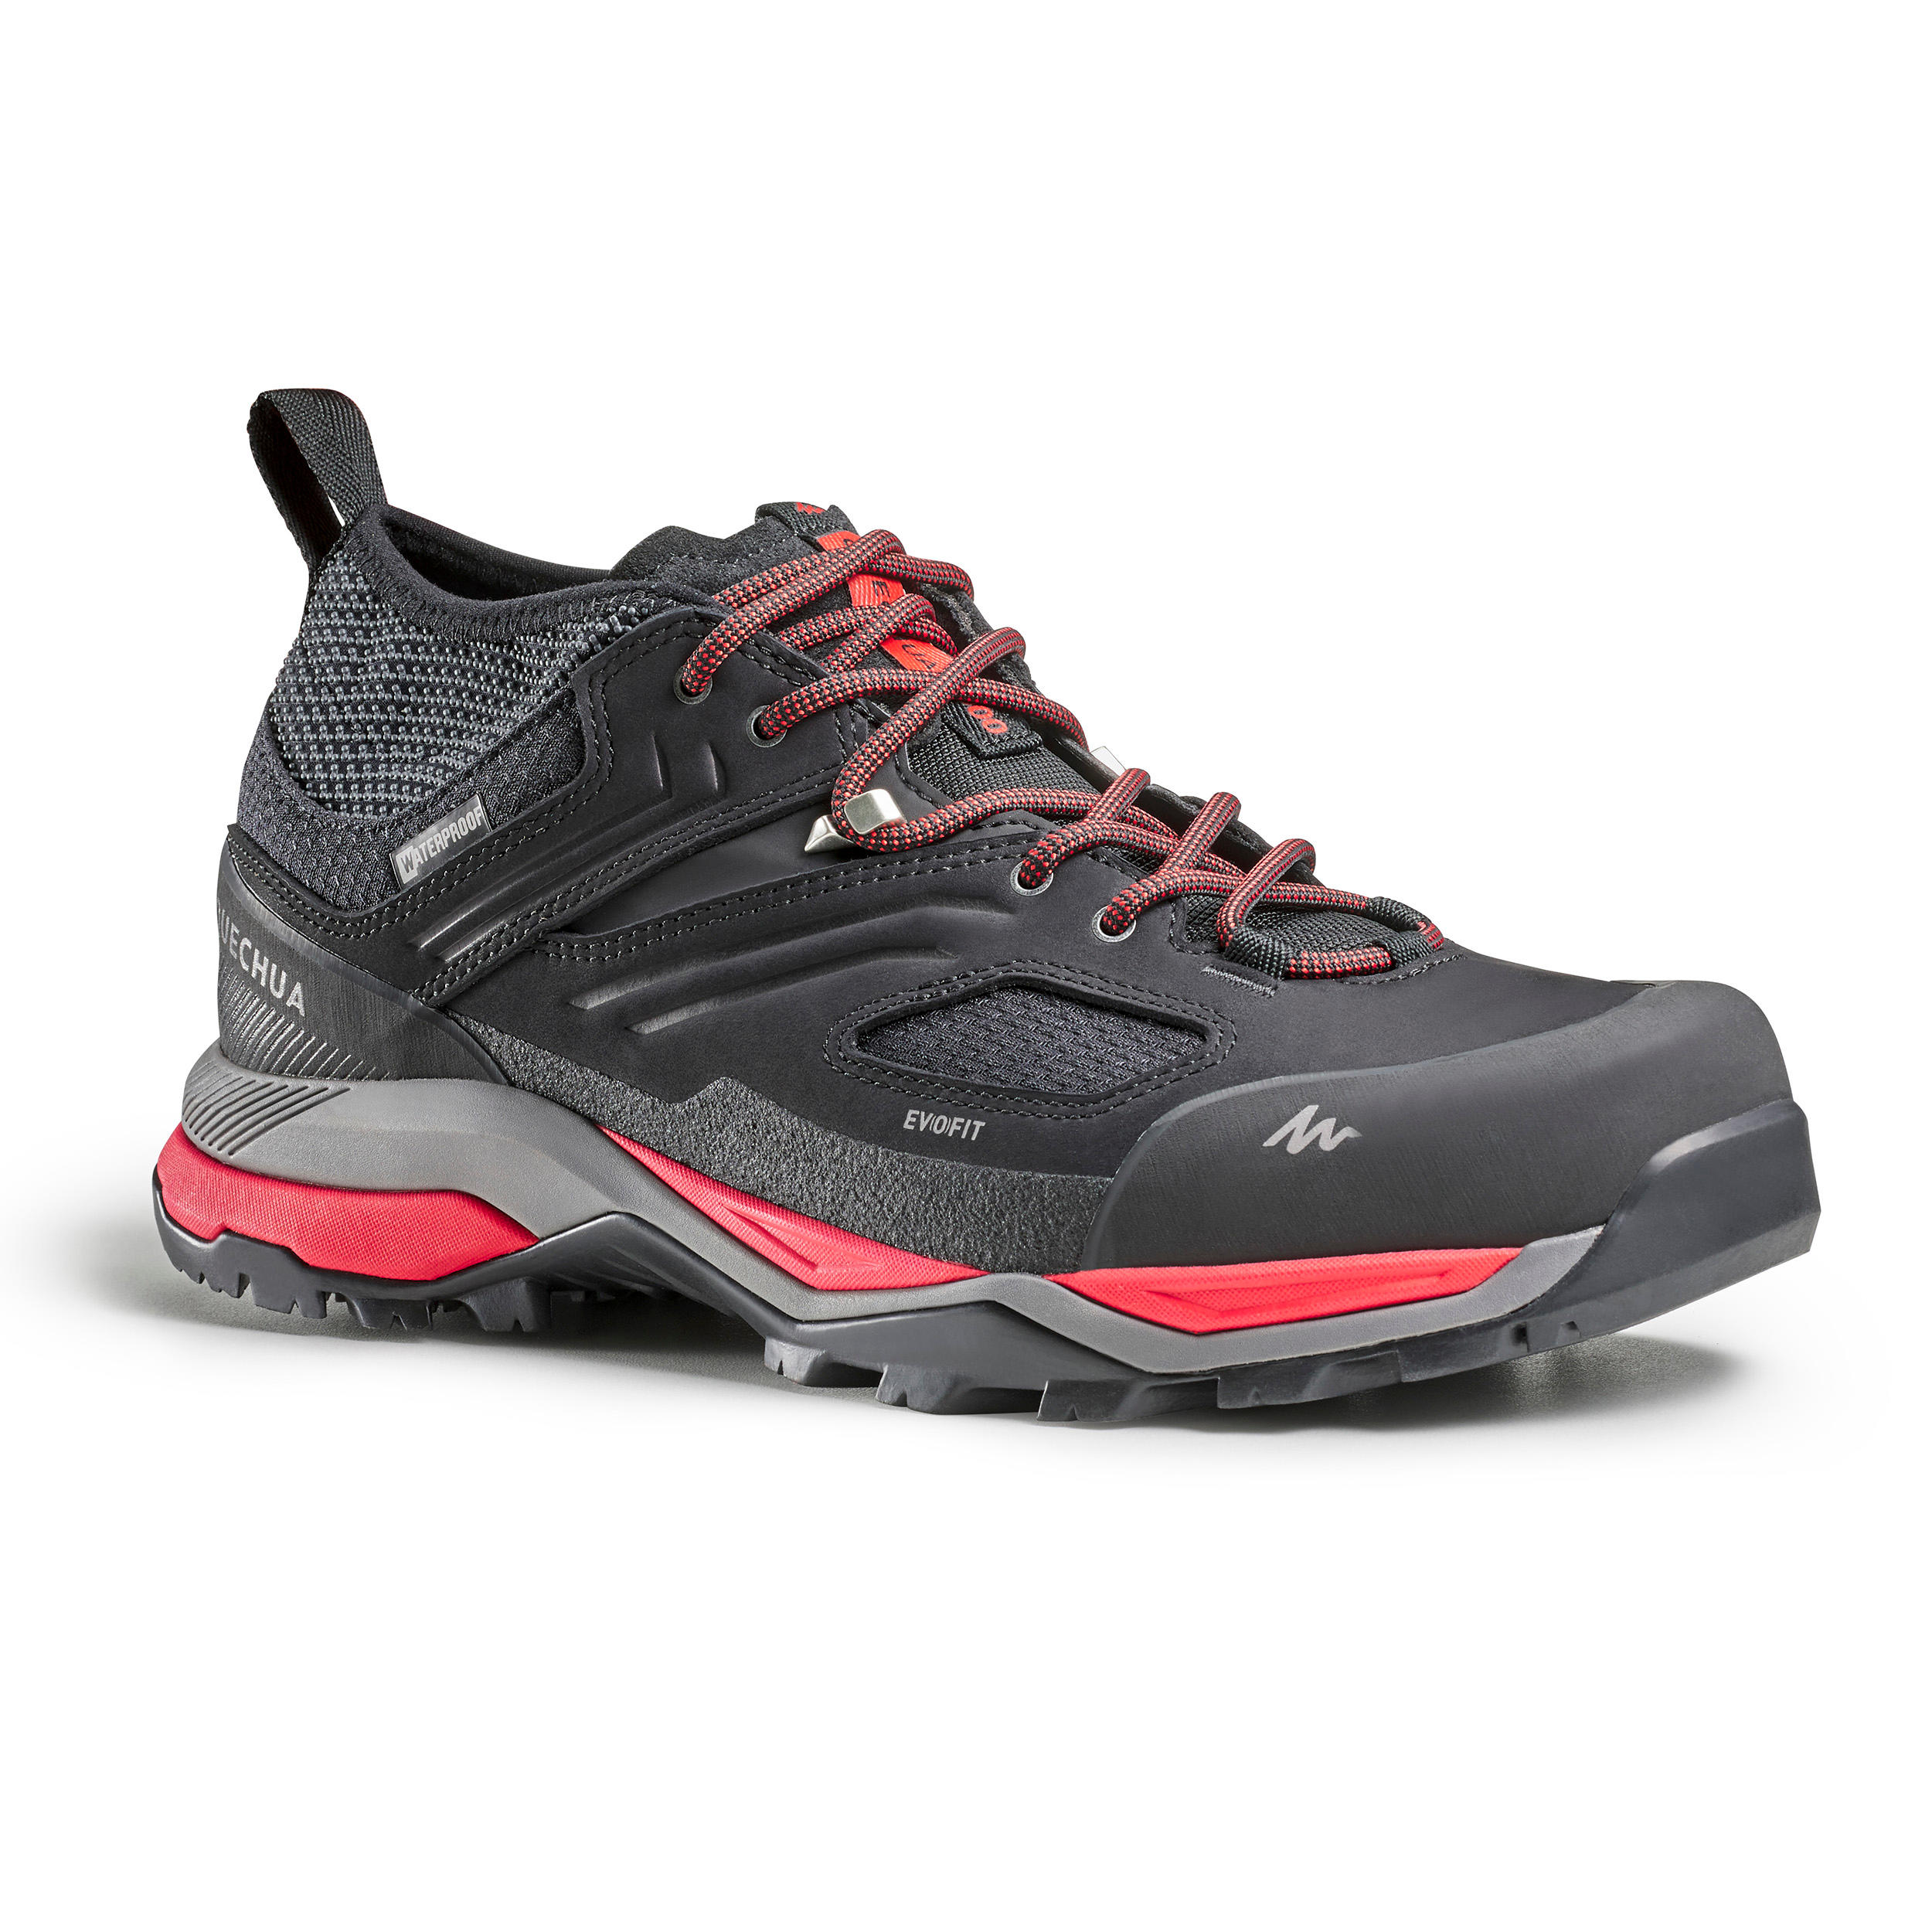 Men's waterproof mountain hiking shoes - MH900 - Black/Red 1/6